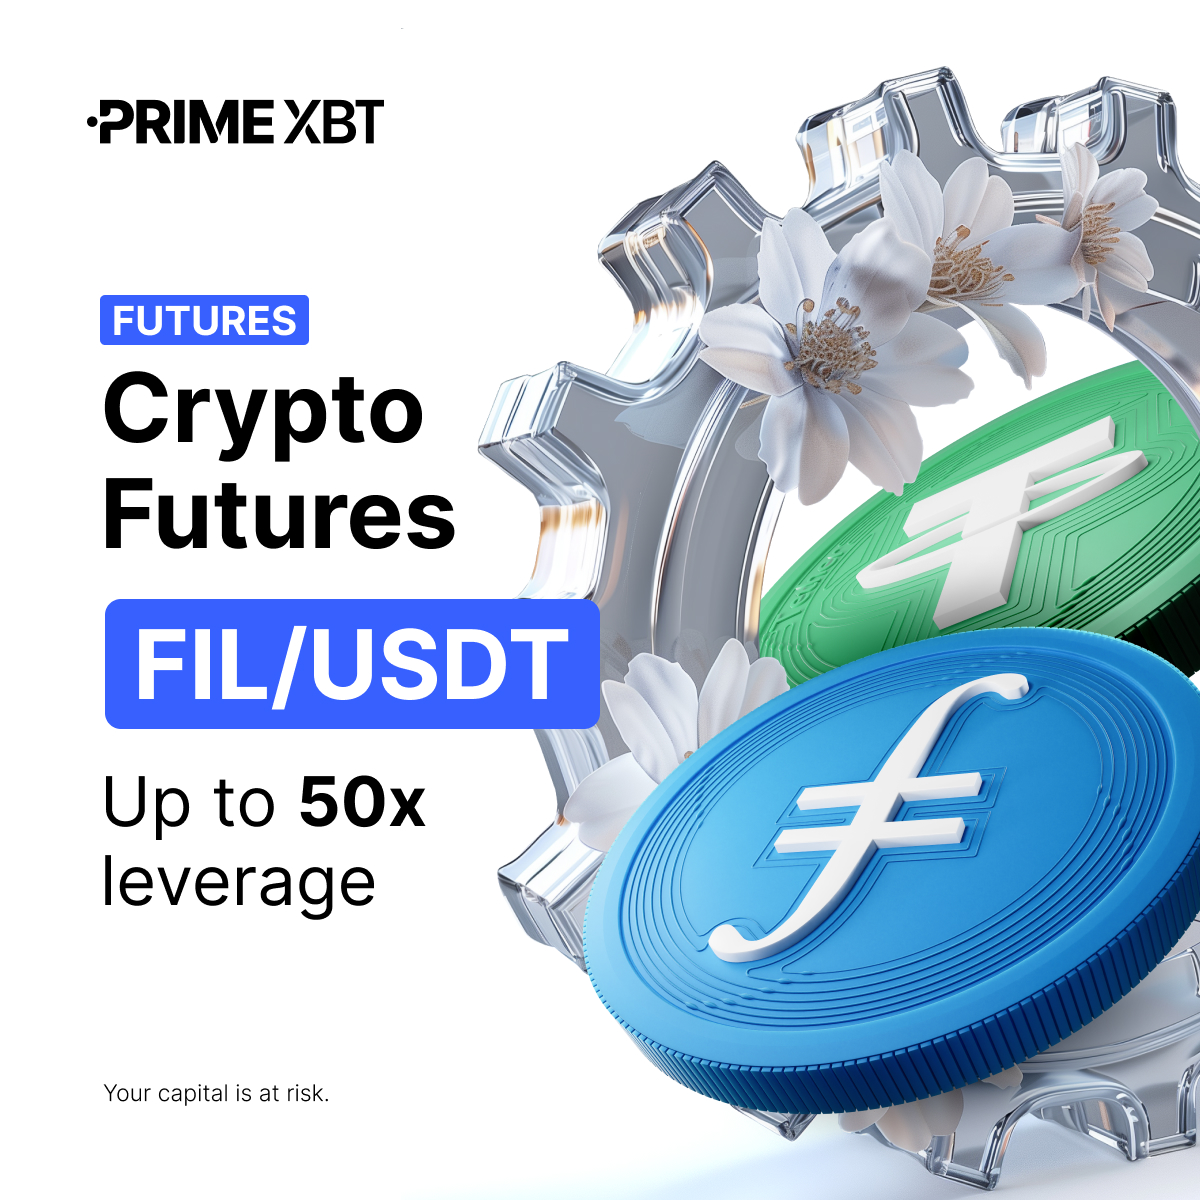 🚀 Explore @Filecoin, the decentralised file storage network! 💥 Experience our robust trading options. Trade $FIL/#USDT Futures with up to 50x leverage. 👉Start here: eng.primexbt.com/3HUxzz2 #PrimeXBT #Trading